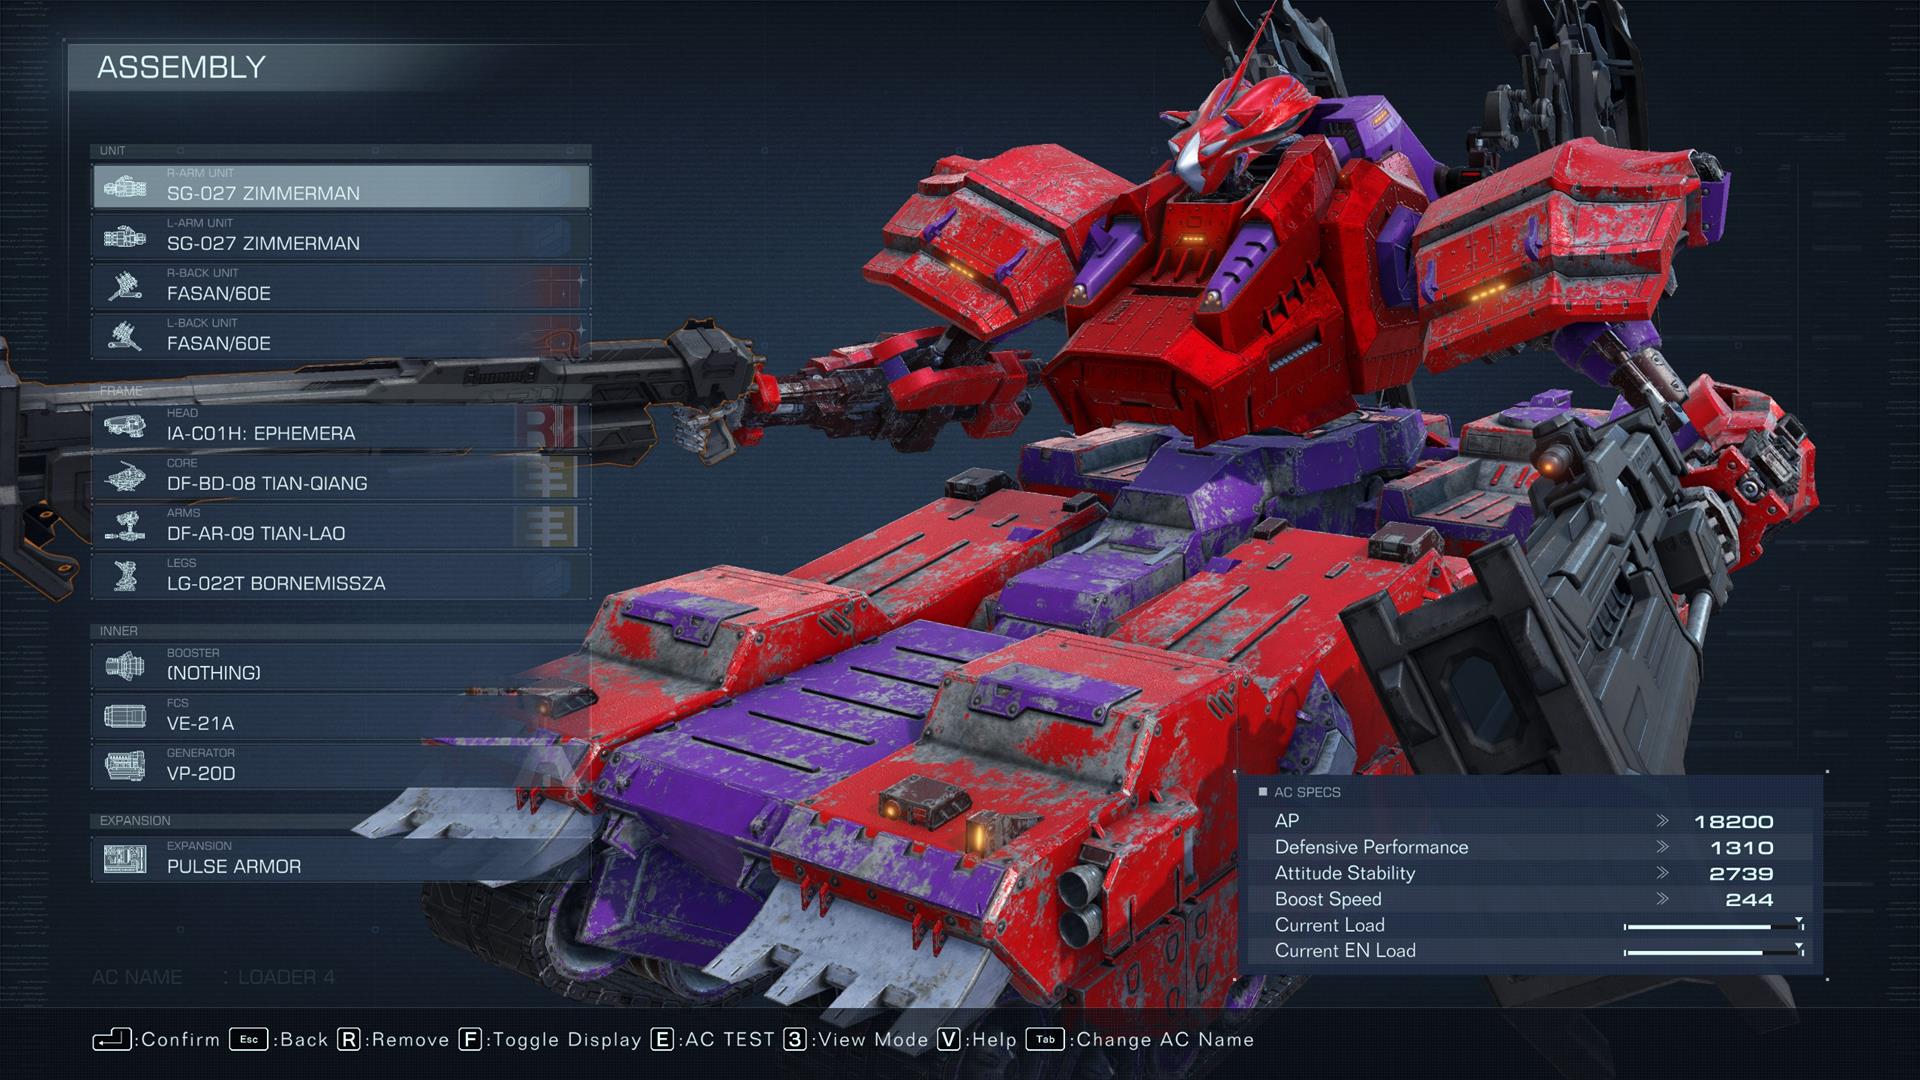 Tips on improving my armored code 3 build? : r/armoredcore